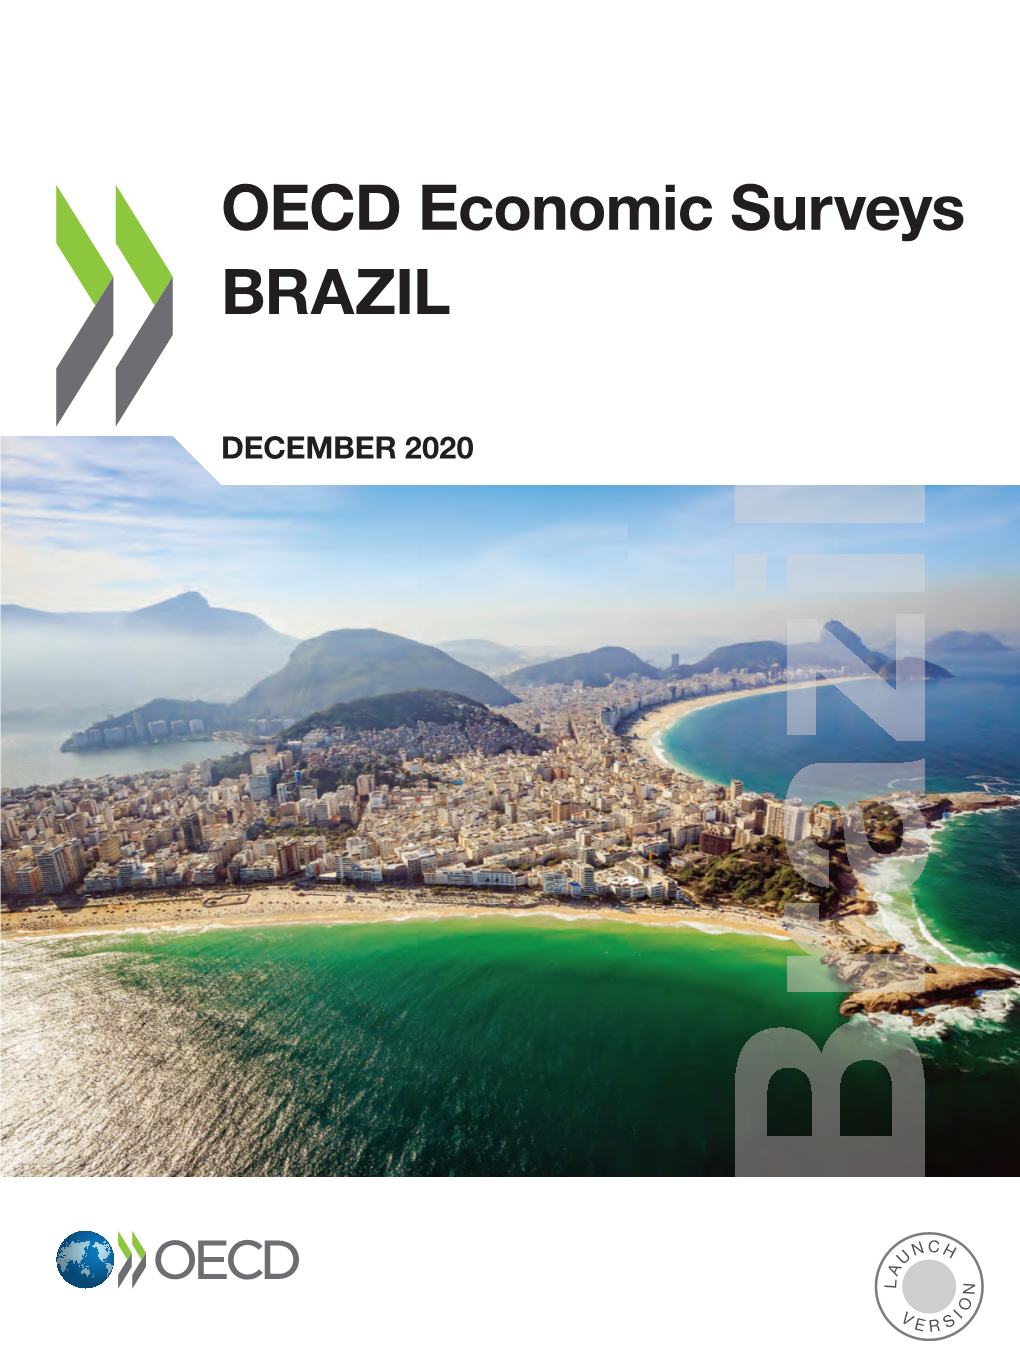 OECD Economic Surveys BRAZIL the COVID-19 Pandemic Has Caused Severe Human Suffering and Triggered a Deep Recession in Brazil